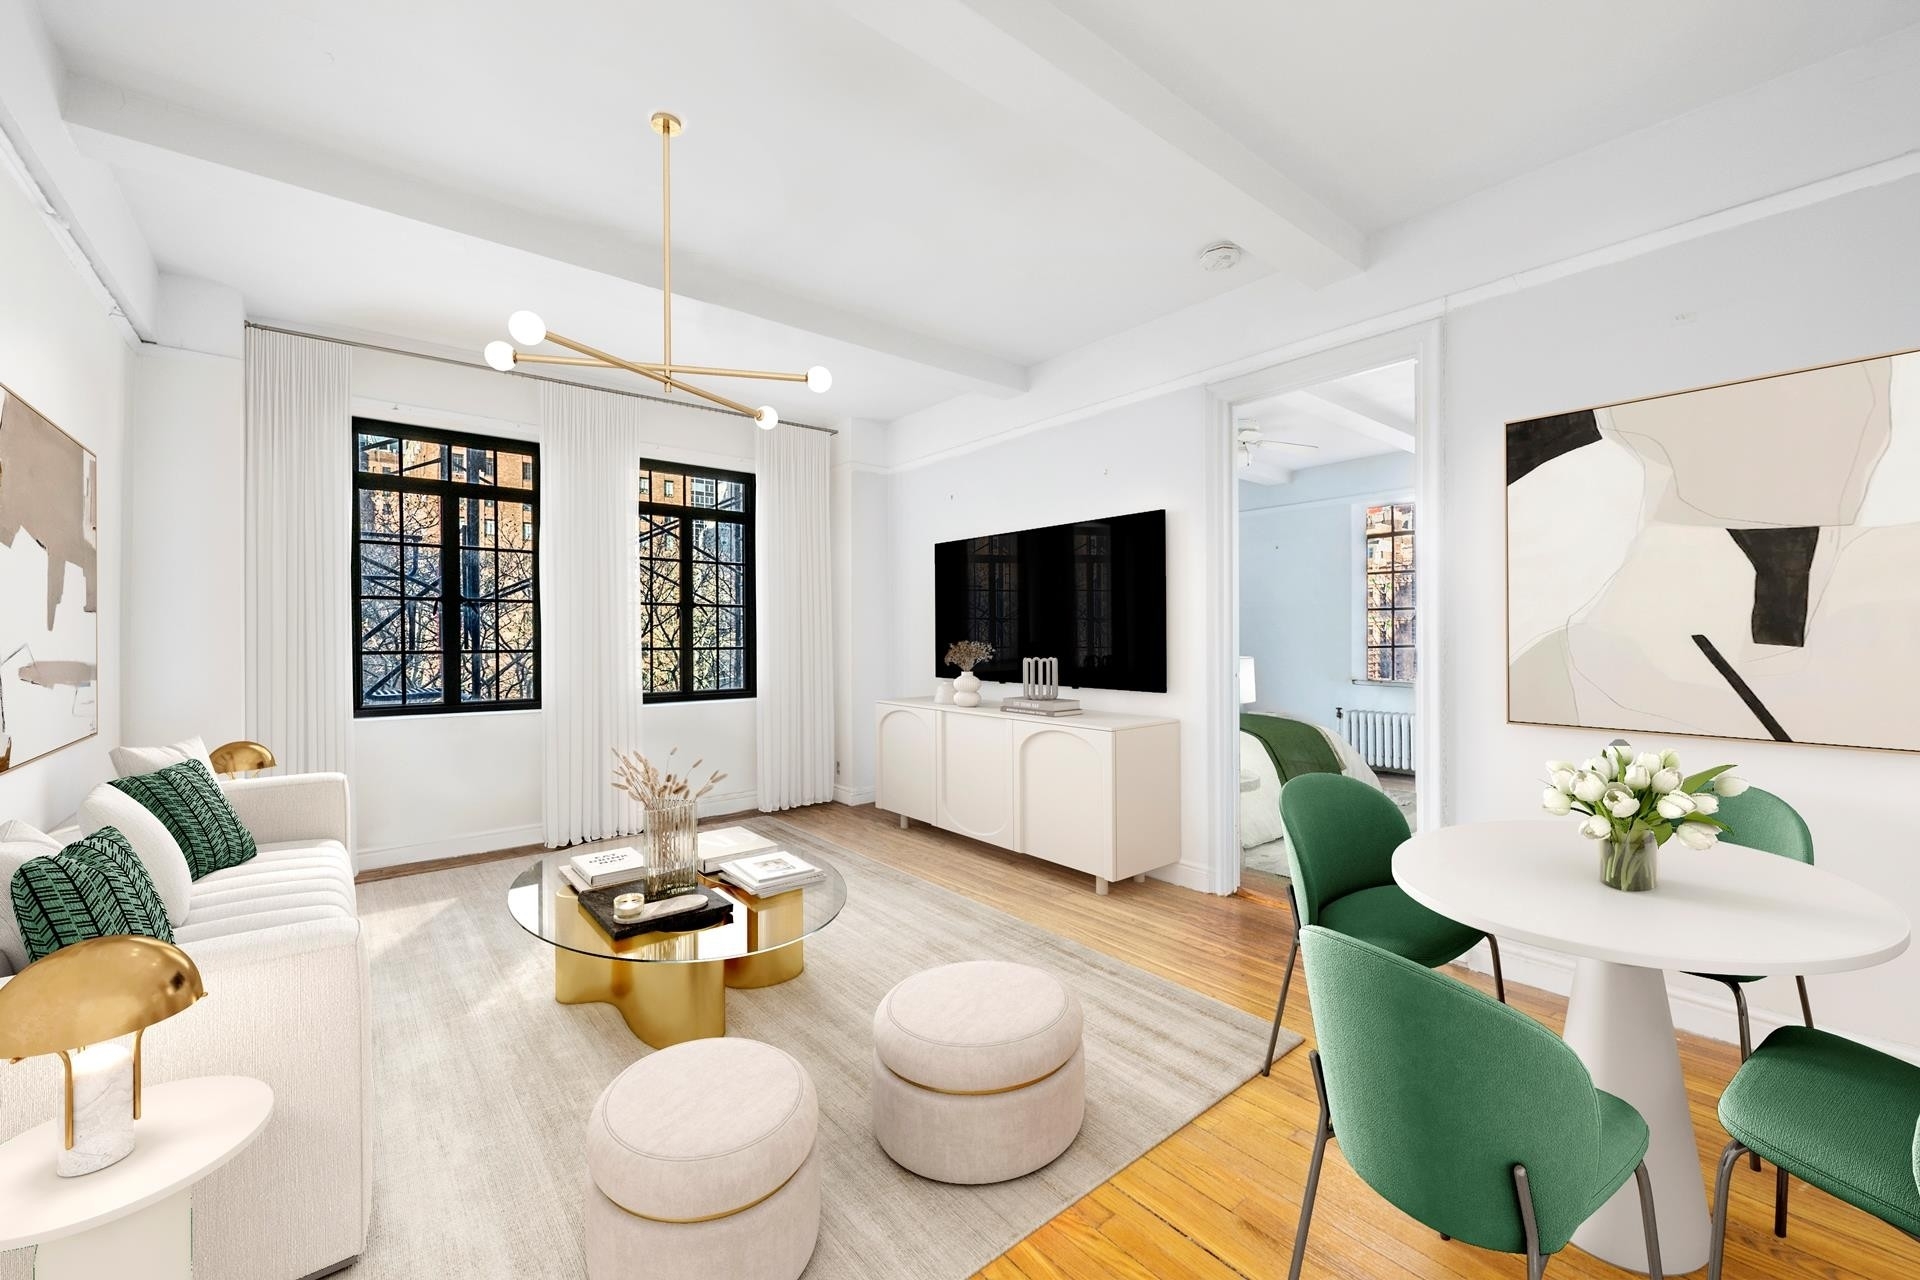 Co-op Properties for Sale at Tudor Tower, 25 TUDOR CITY PL, 611 Murray Hill, New York, NY 10017